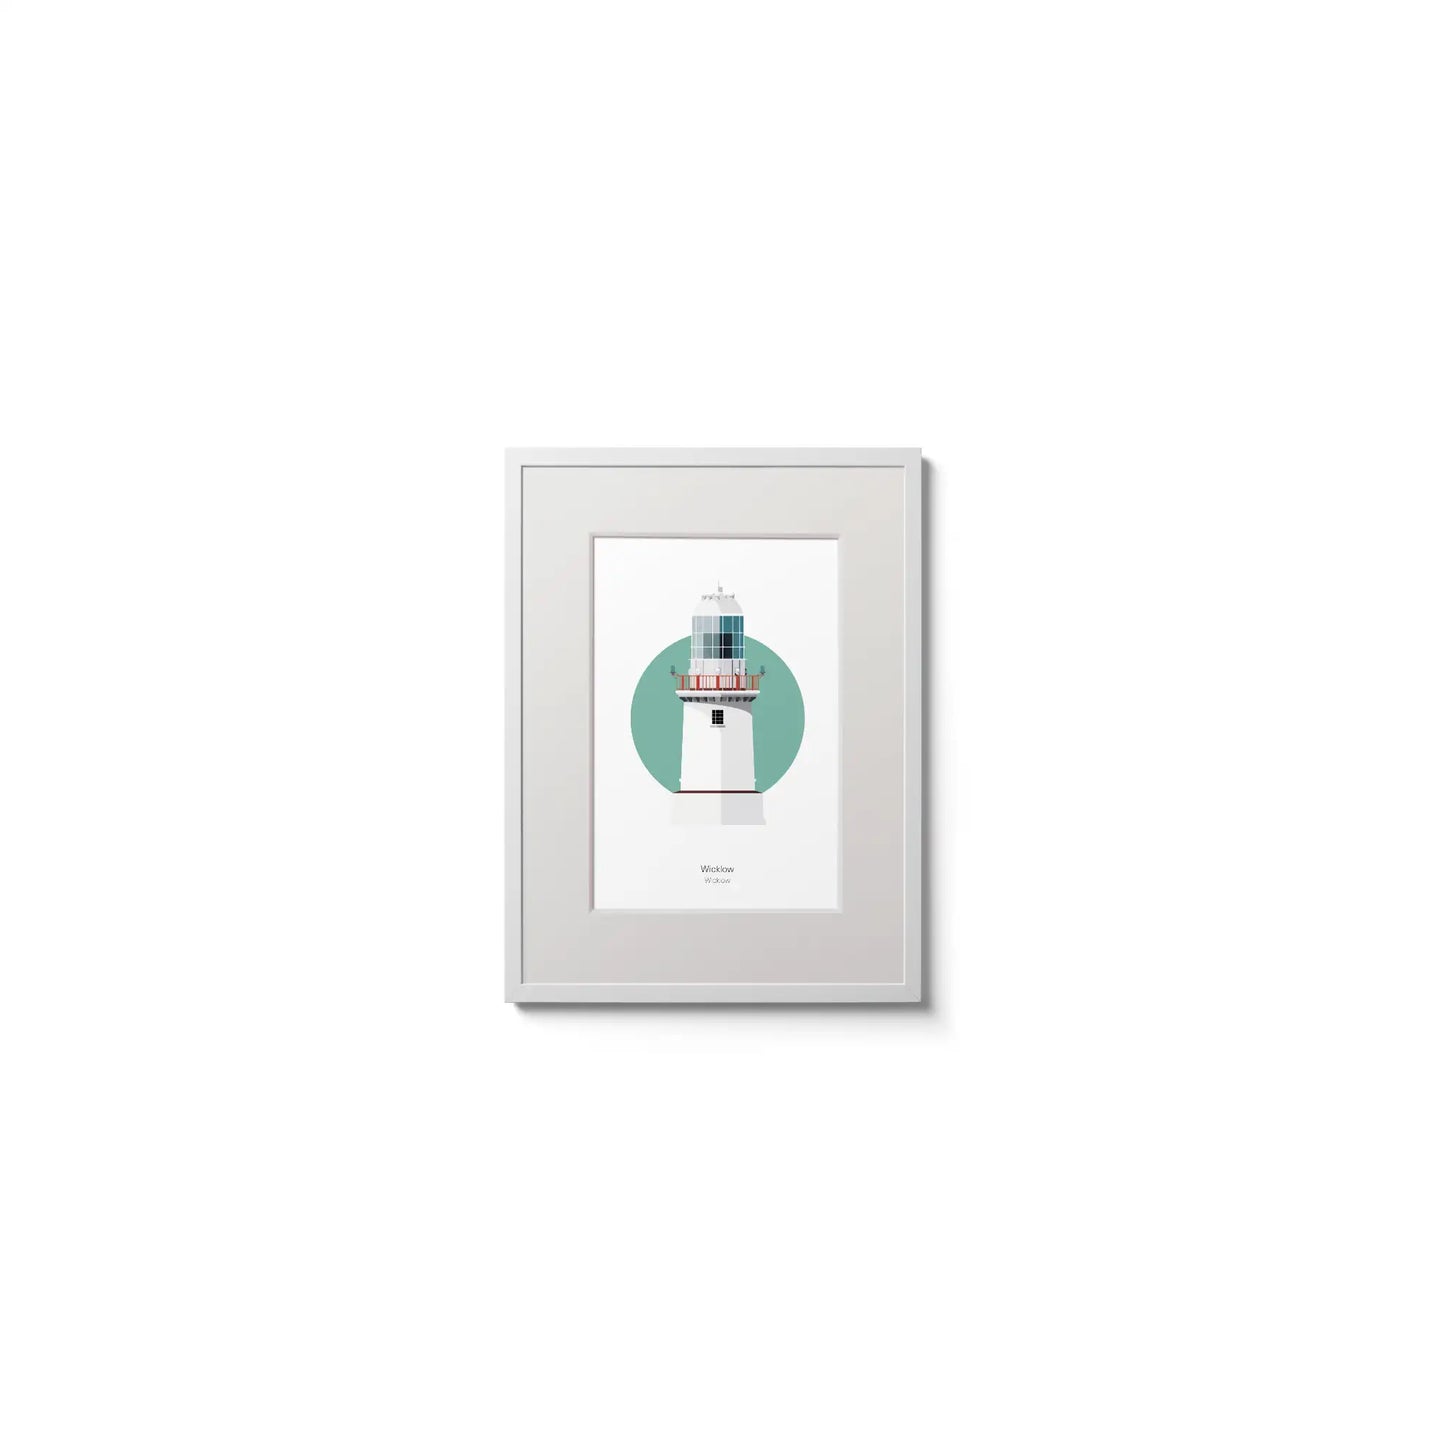 Illustration of Wicklow New lighthouse on a white background inside light blue square,  in a white frame measuring 15x20cm.